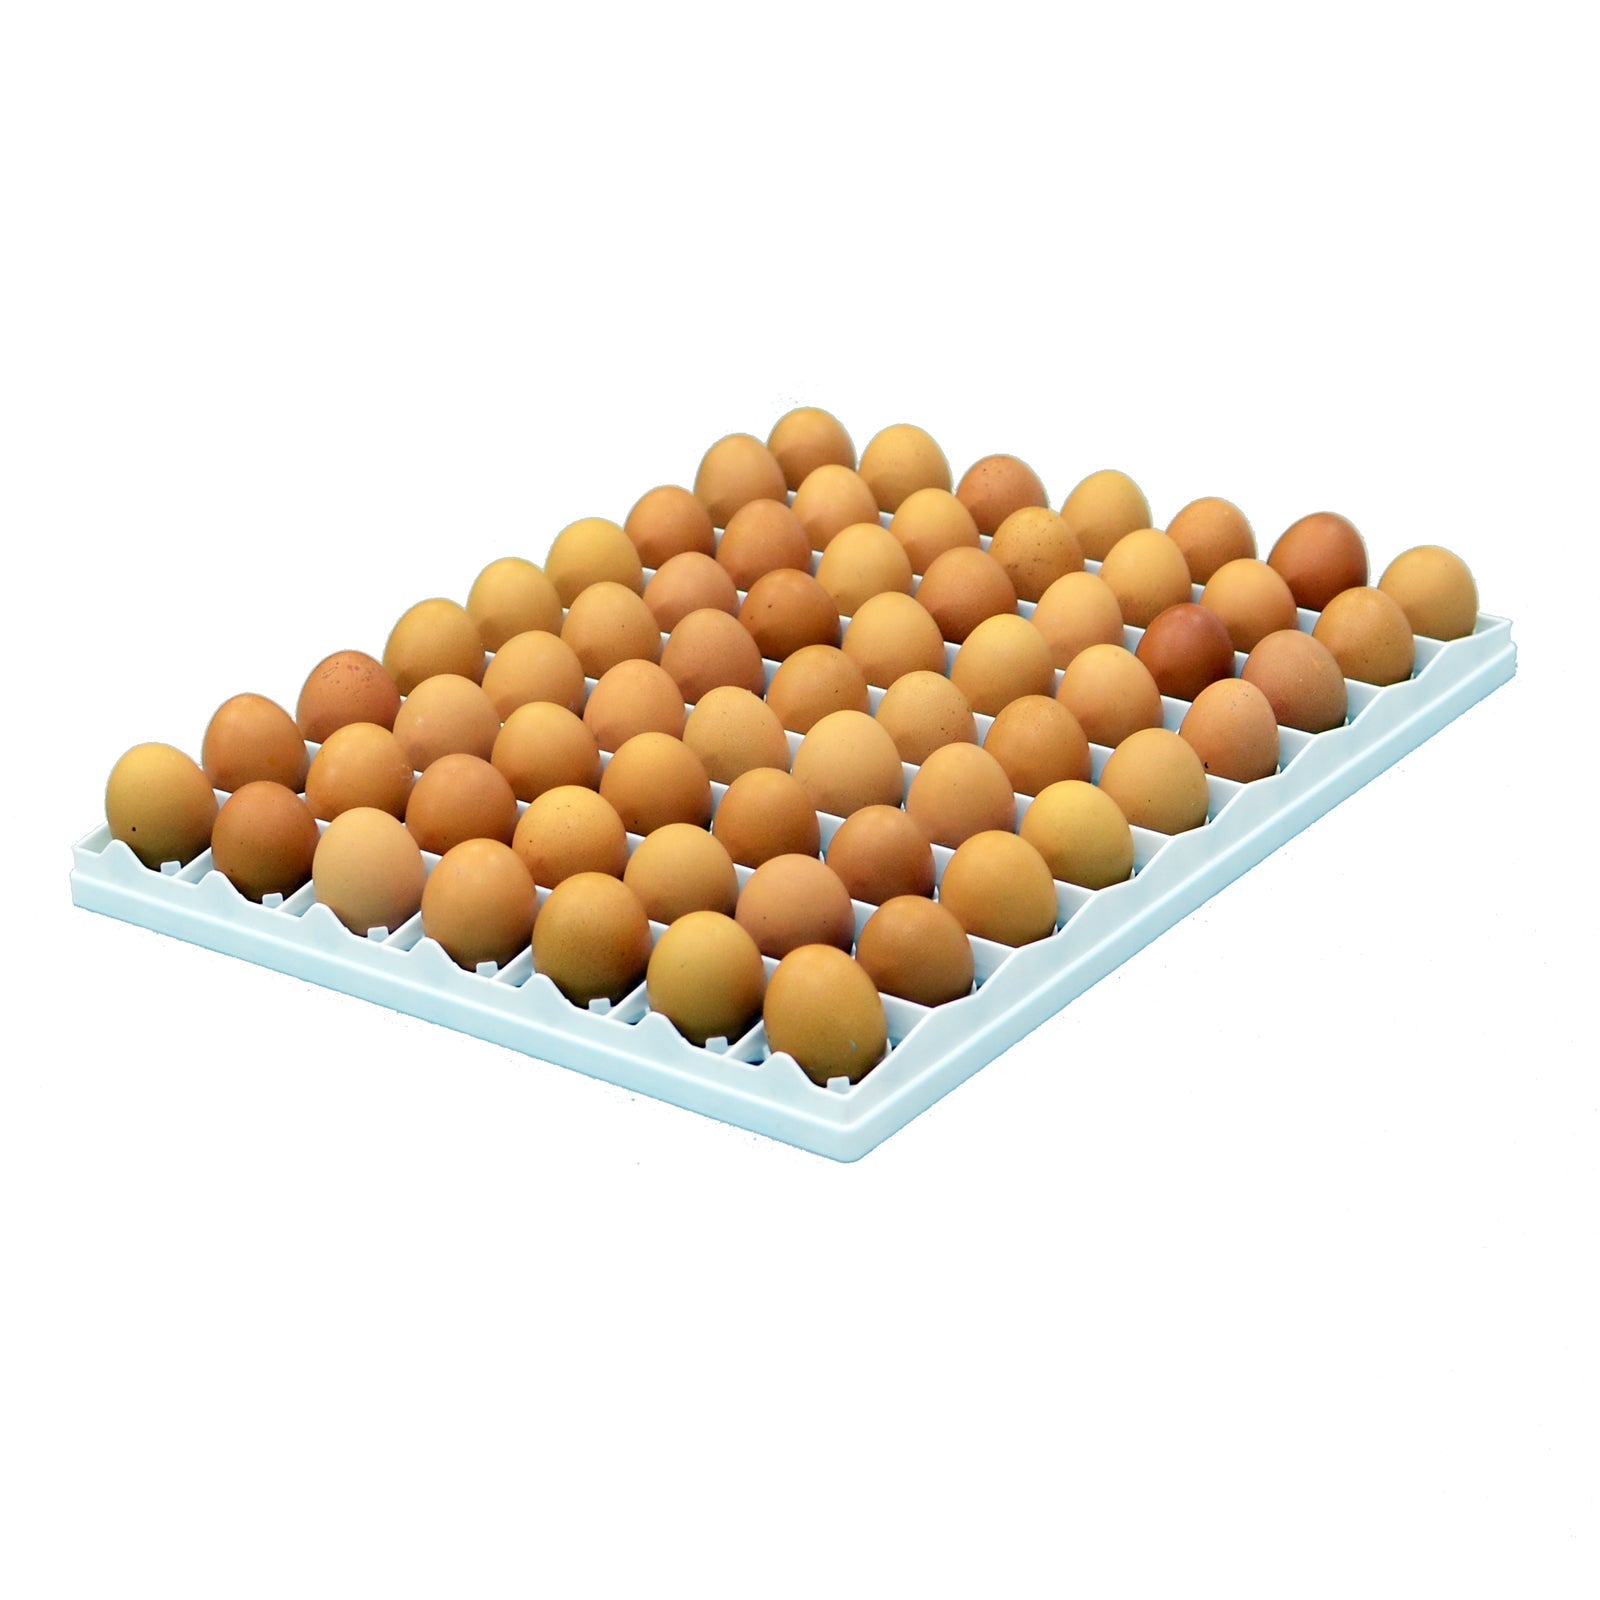 Hatching Time Cimuka. Egg setter tray can be seen in image full of 63 brown chicken eggs to show large capacity for egg setting.